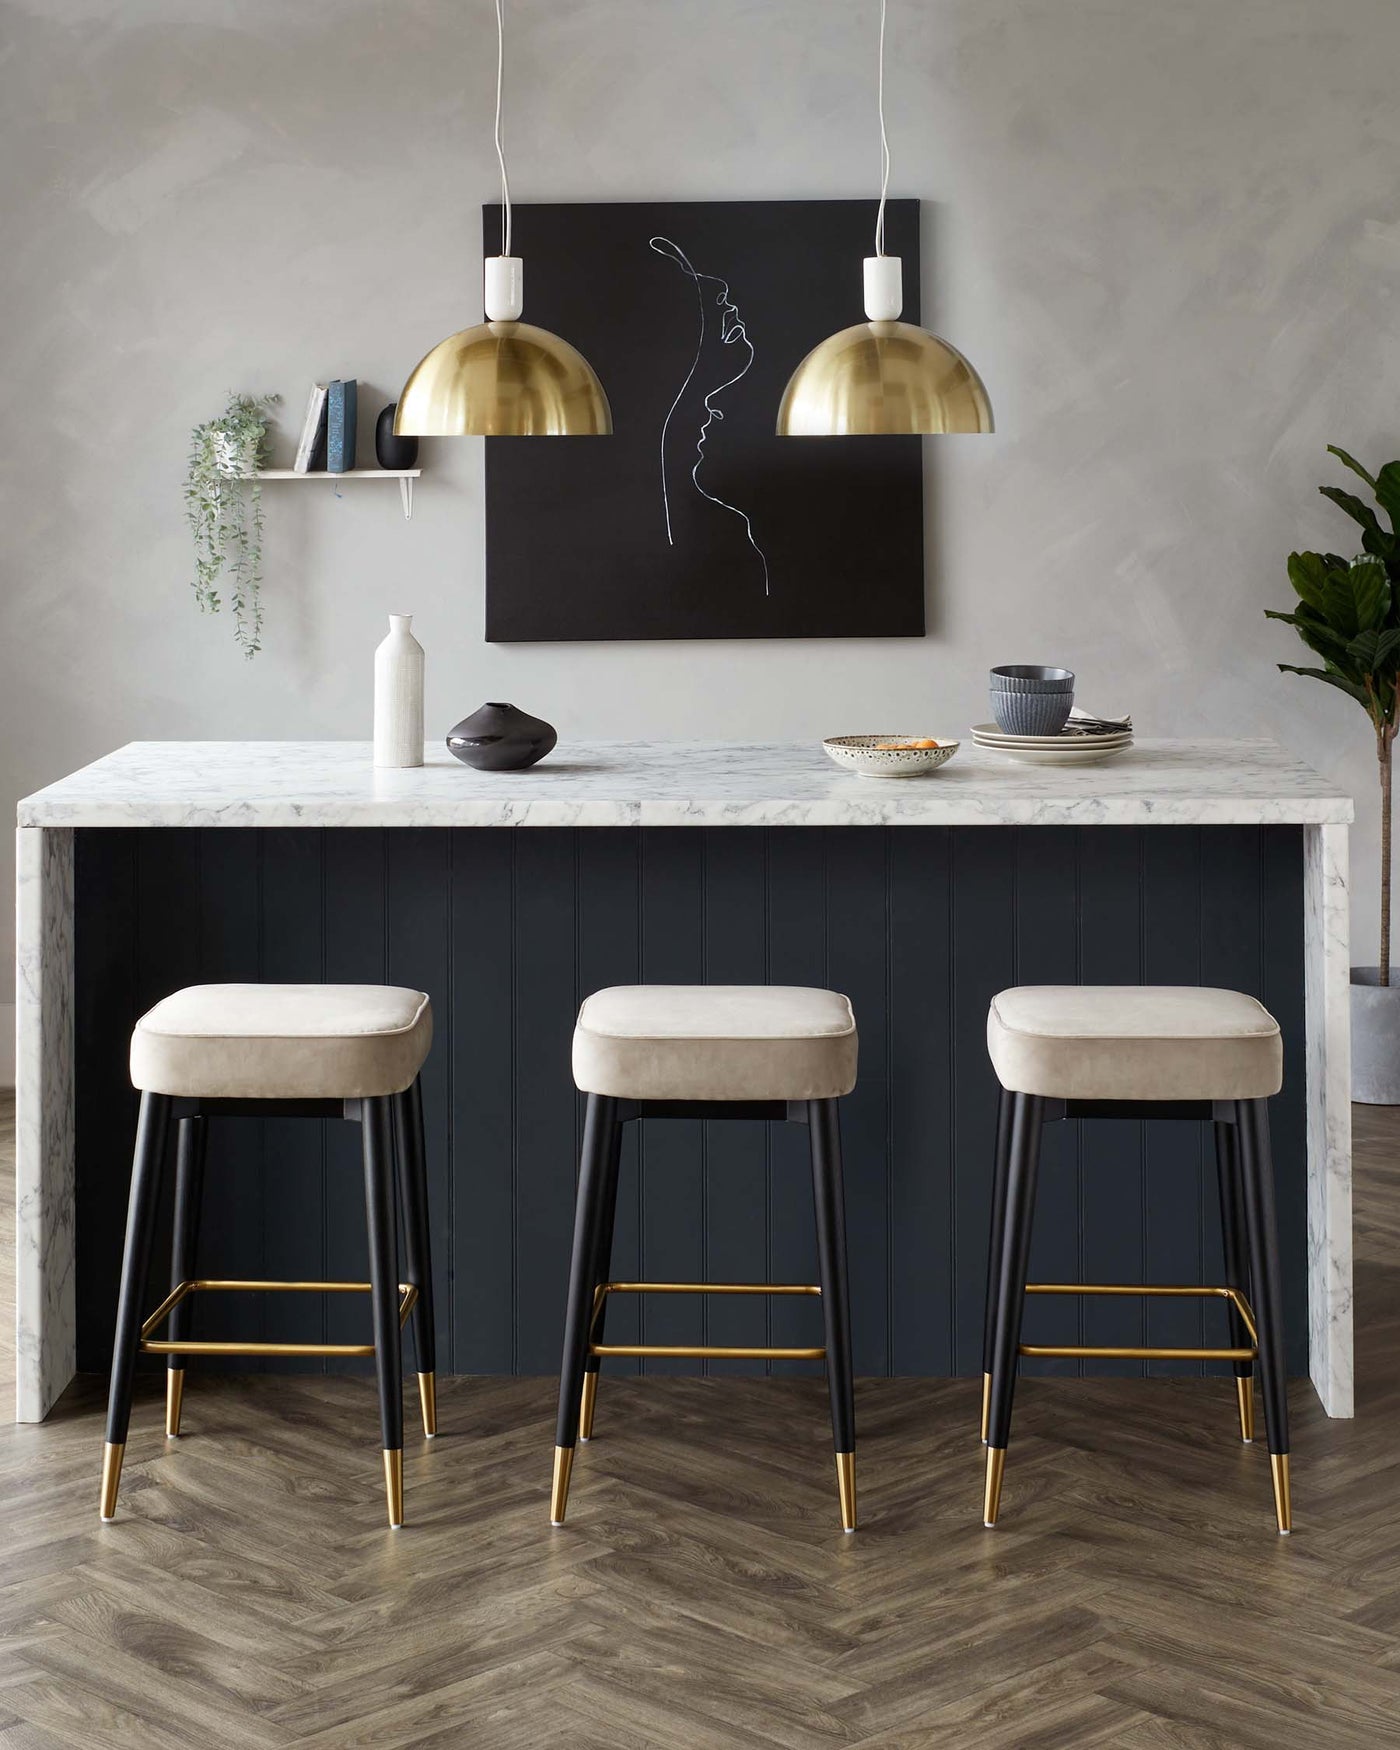 Elegant modern kitchen setting featuring three bar stools with black frames and gold accents, complemented by sleek, plush, light beige seating. The stools are arranged at a kitchen island with a white marble countertop and a dark panelled base. The space is styled with minimalistic decor and soft lighting.